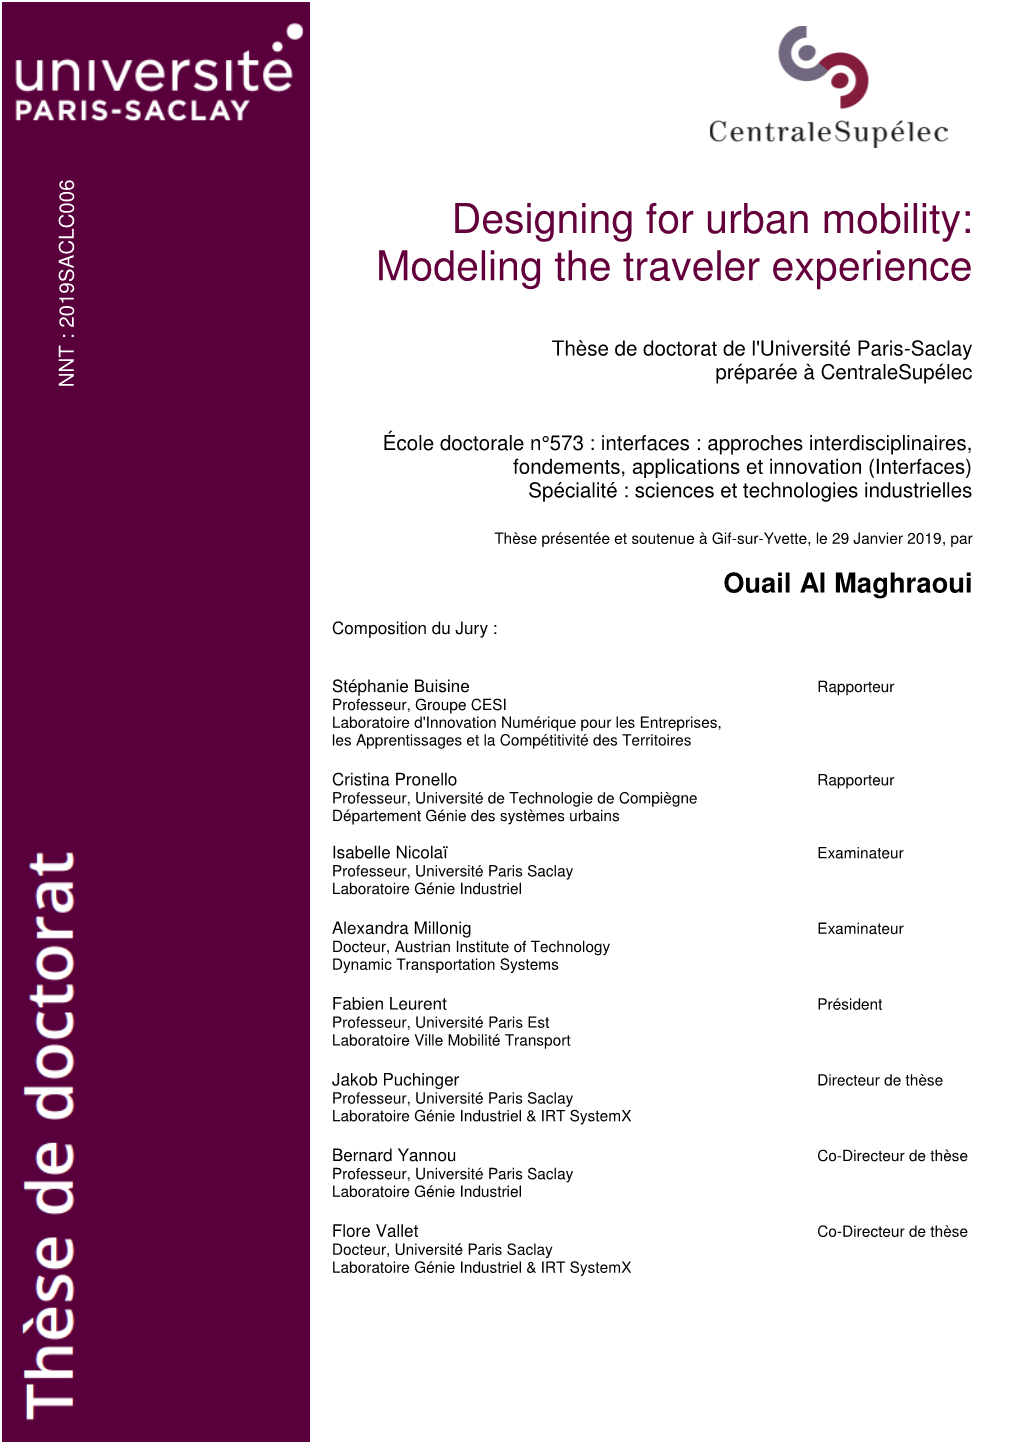 Designing for Urban Mobility: Modeling the Traveler Experience